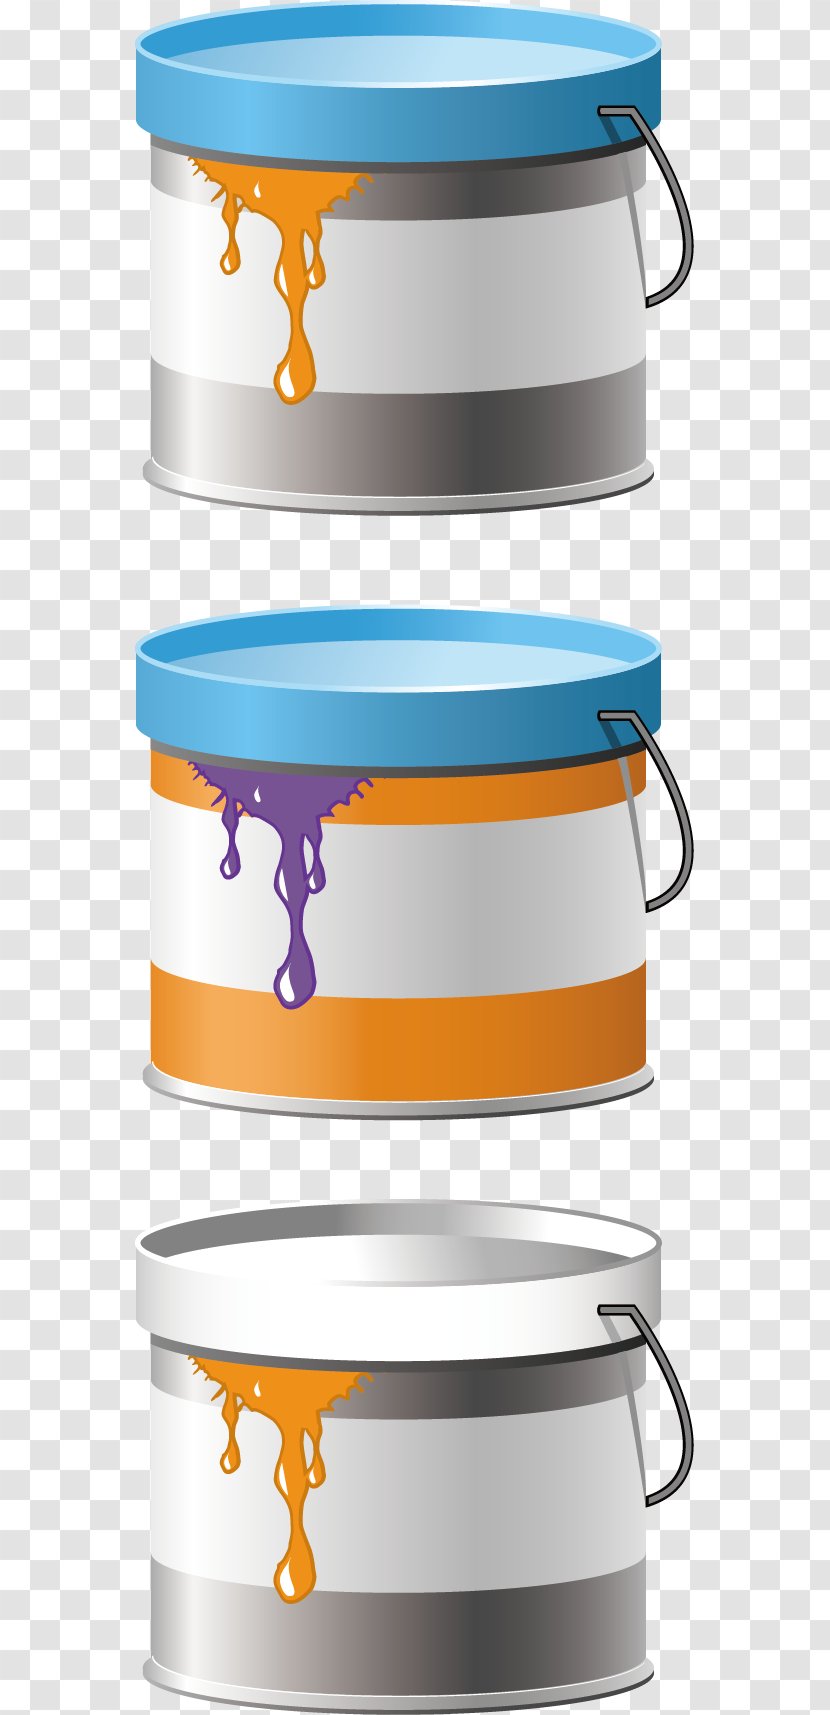 Paintbrush Lacquer - Brand - All Kinds Of Bucket Transparent PNG